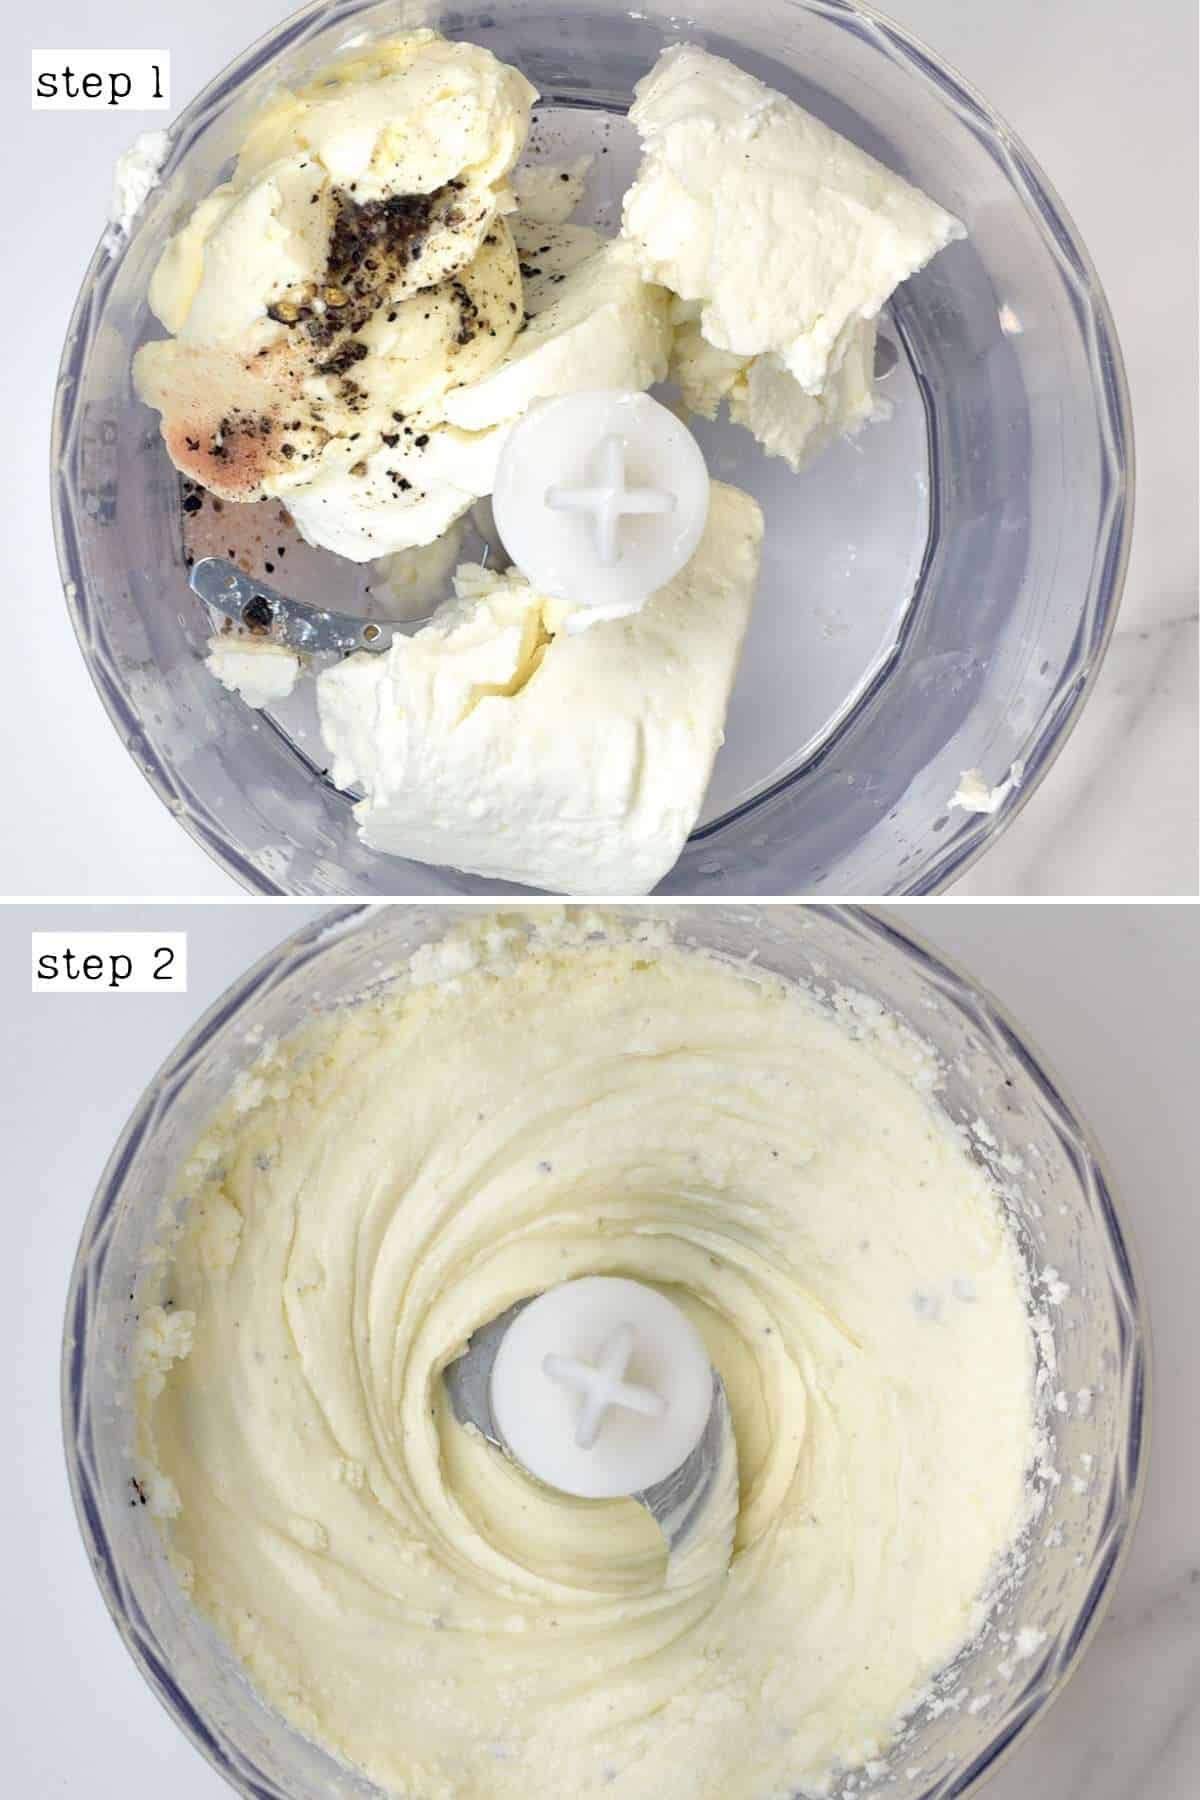 Steps for making whipped cheese